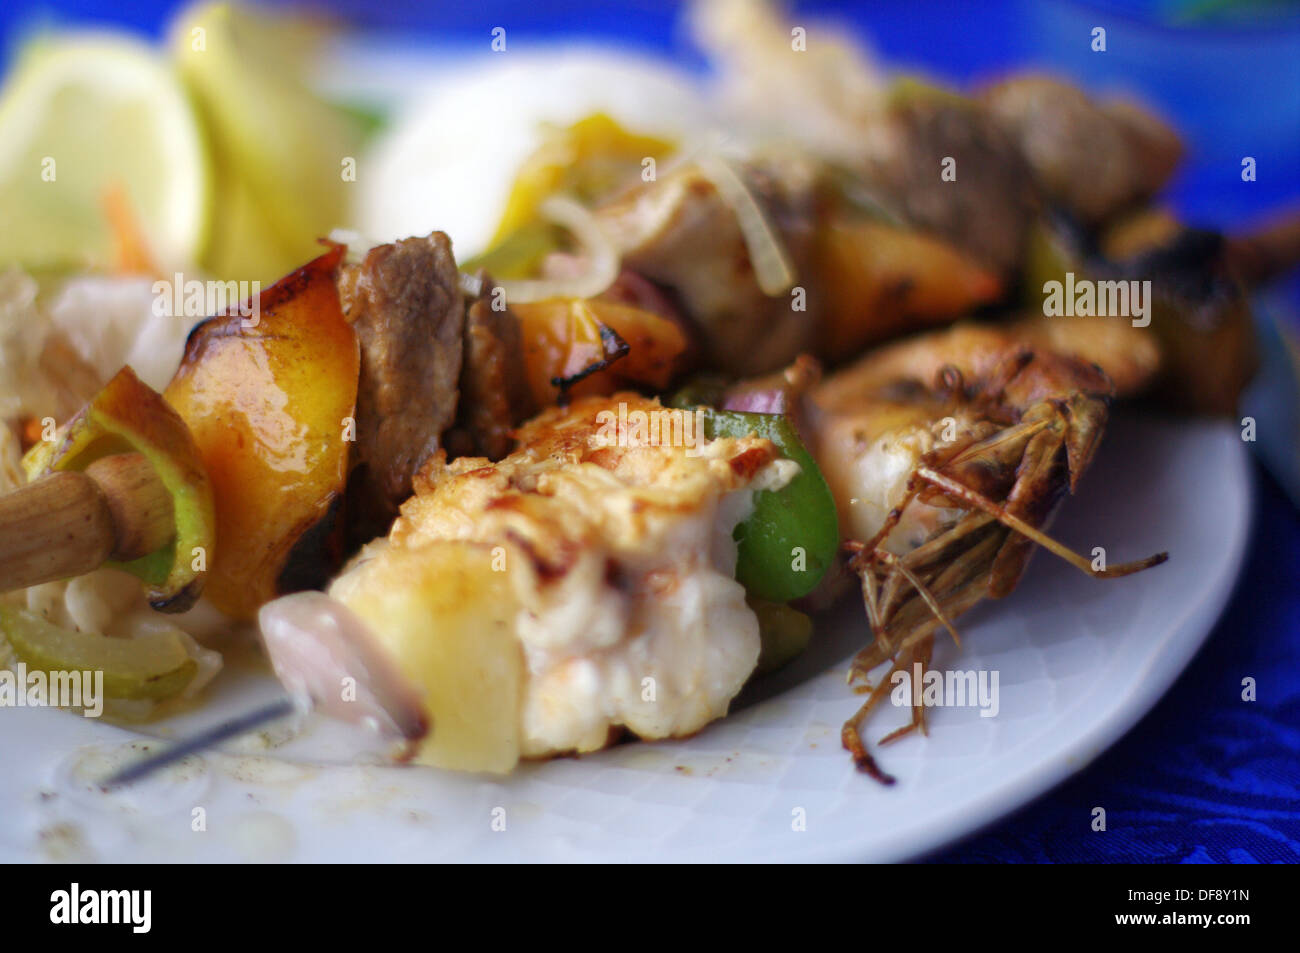 Meat and seafood skewers - Trinidad, Cuba Stock Photo